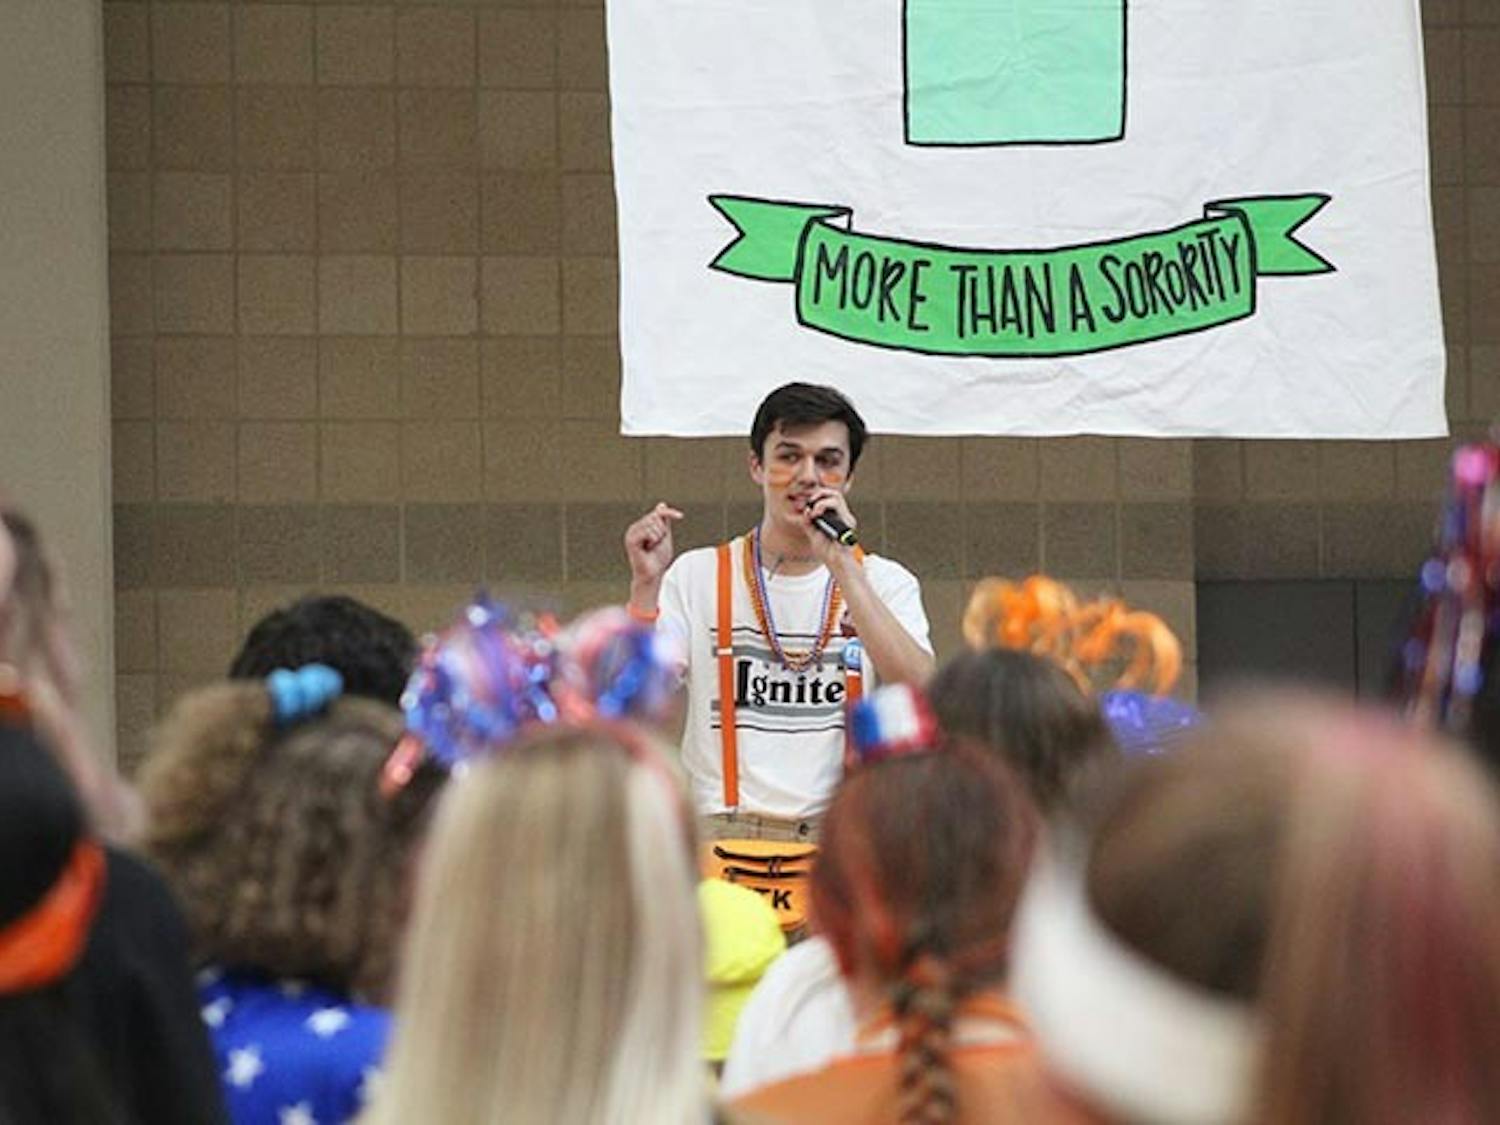 First-year economics student Seth Hajzus shares his experience with crowd at Dance Marathon and speaks about the families that he has met through working with the organization.&nbsp;